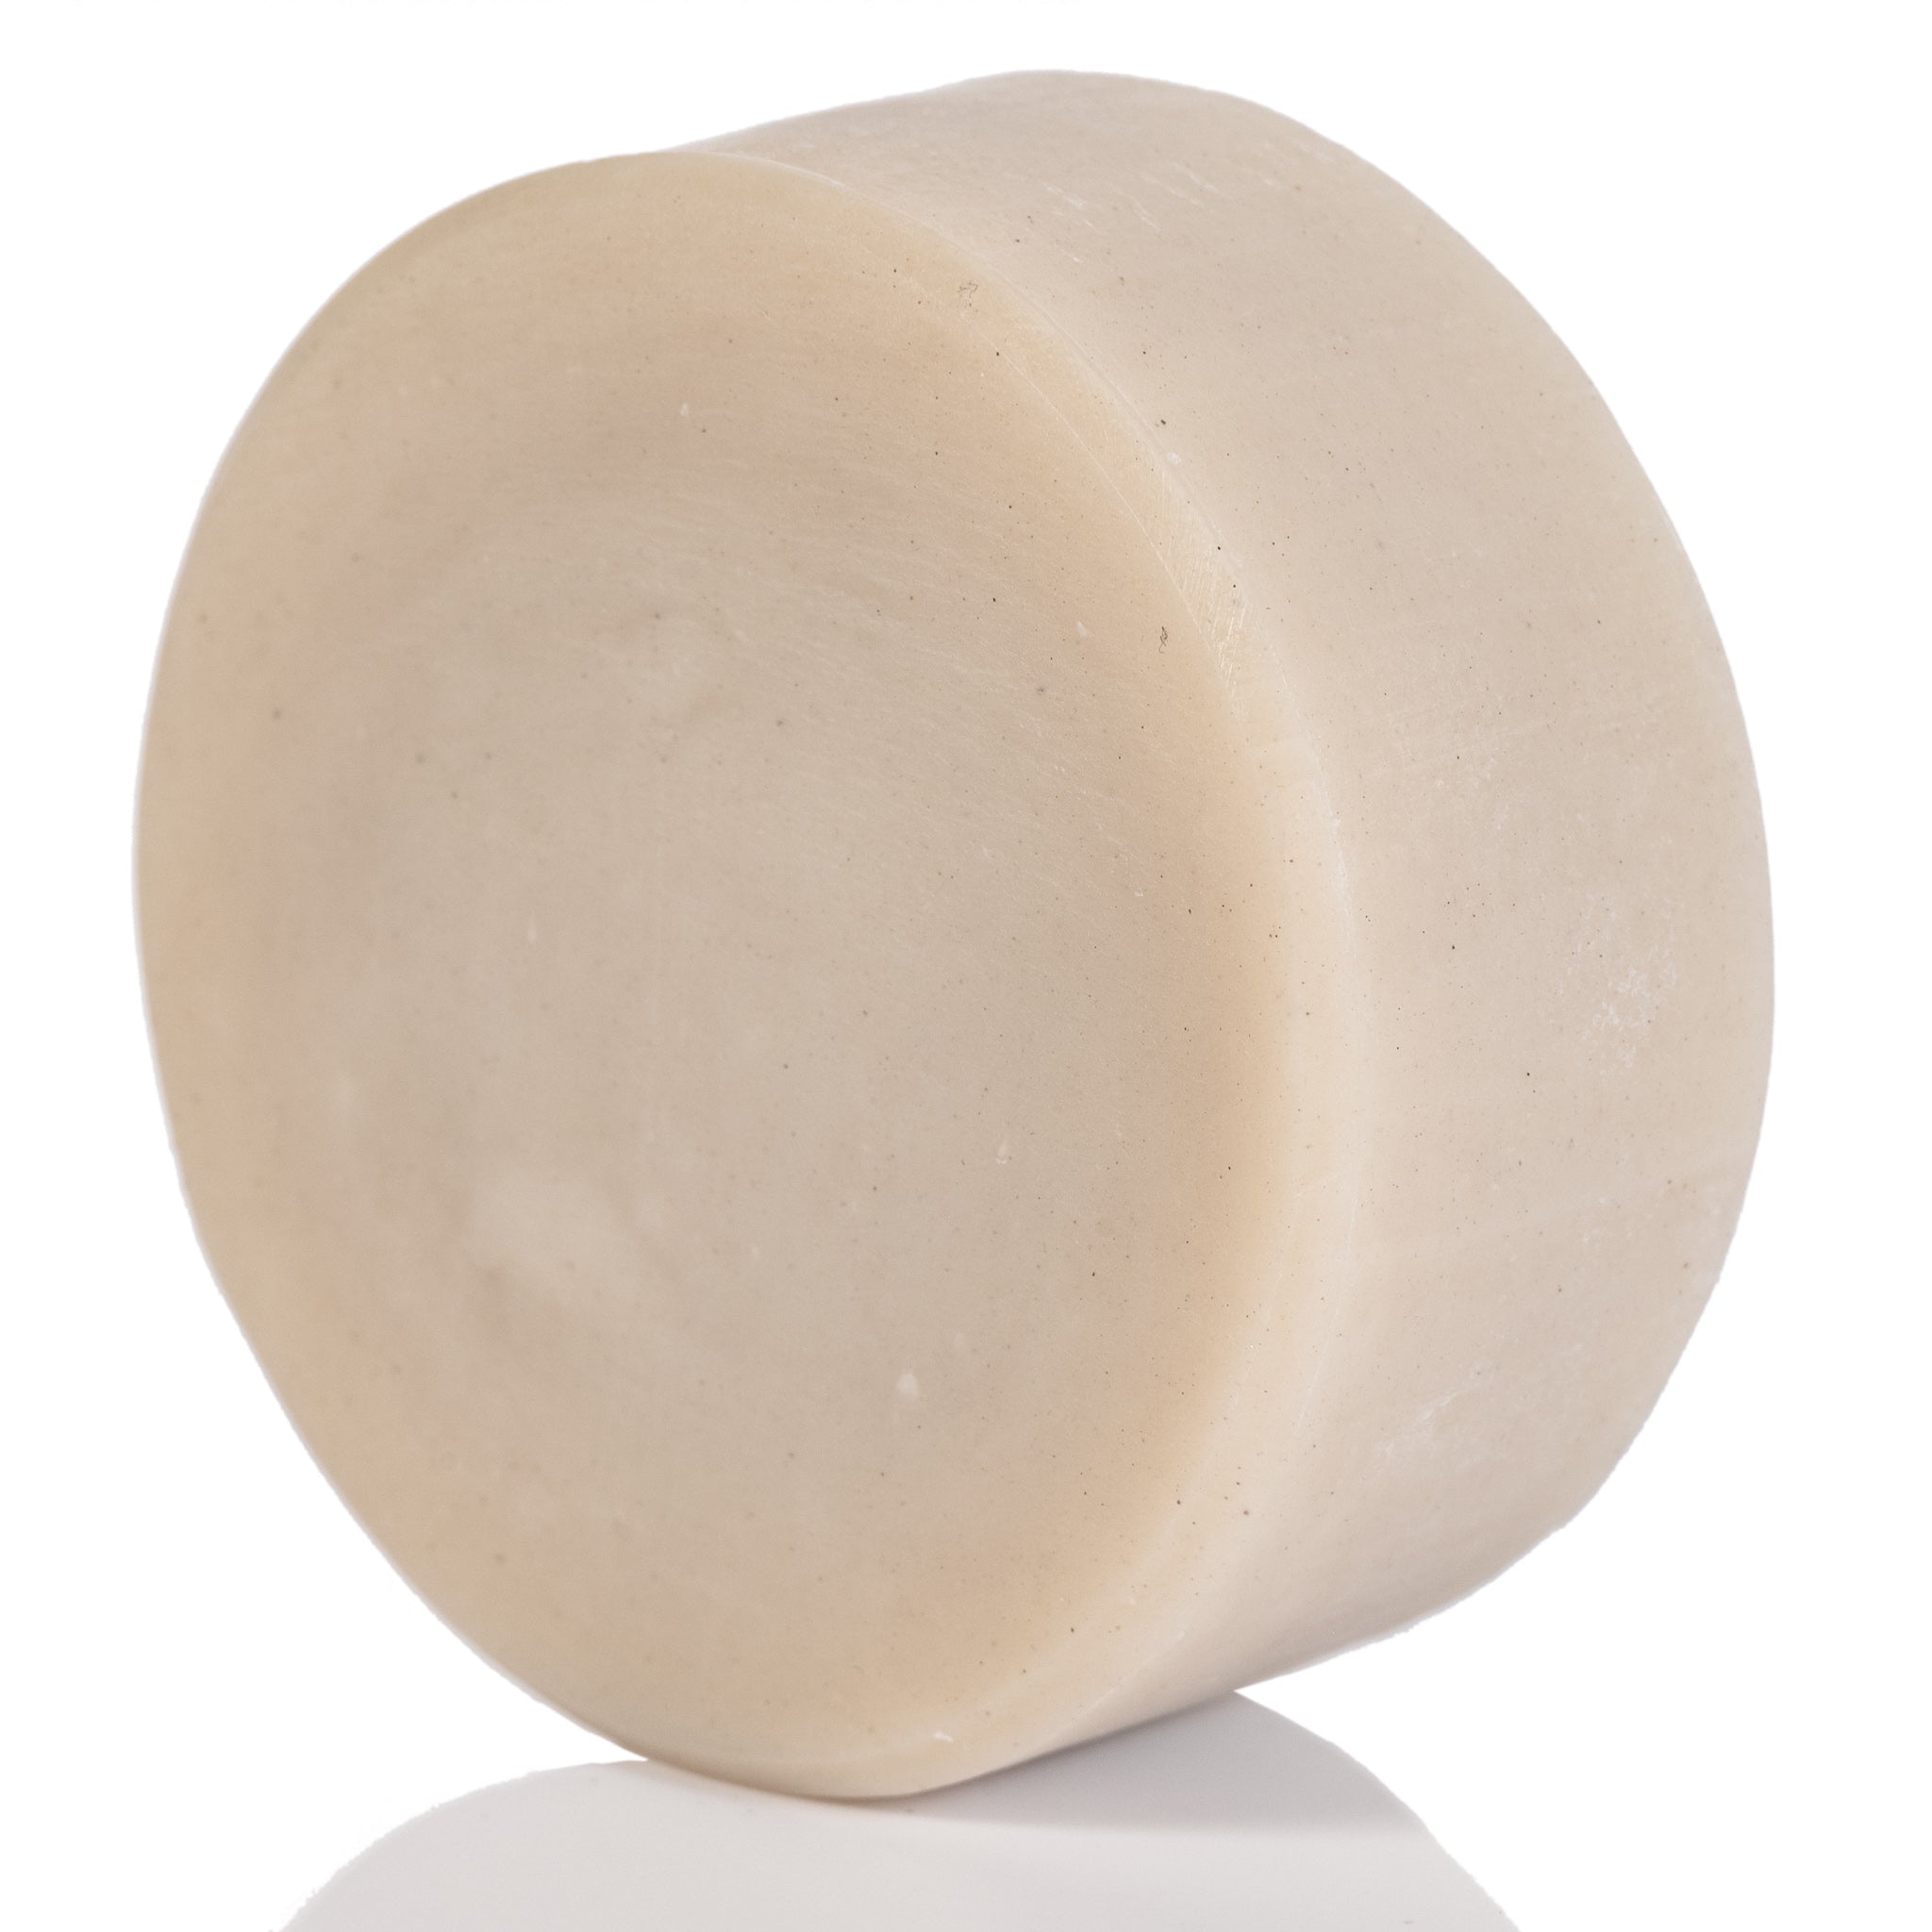 All natural good lathering unscented shaving soap refill.